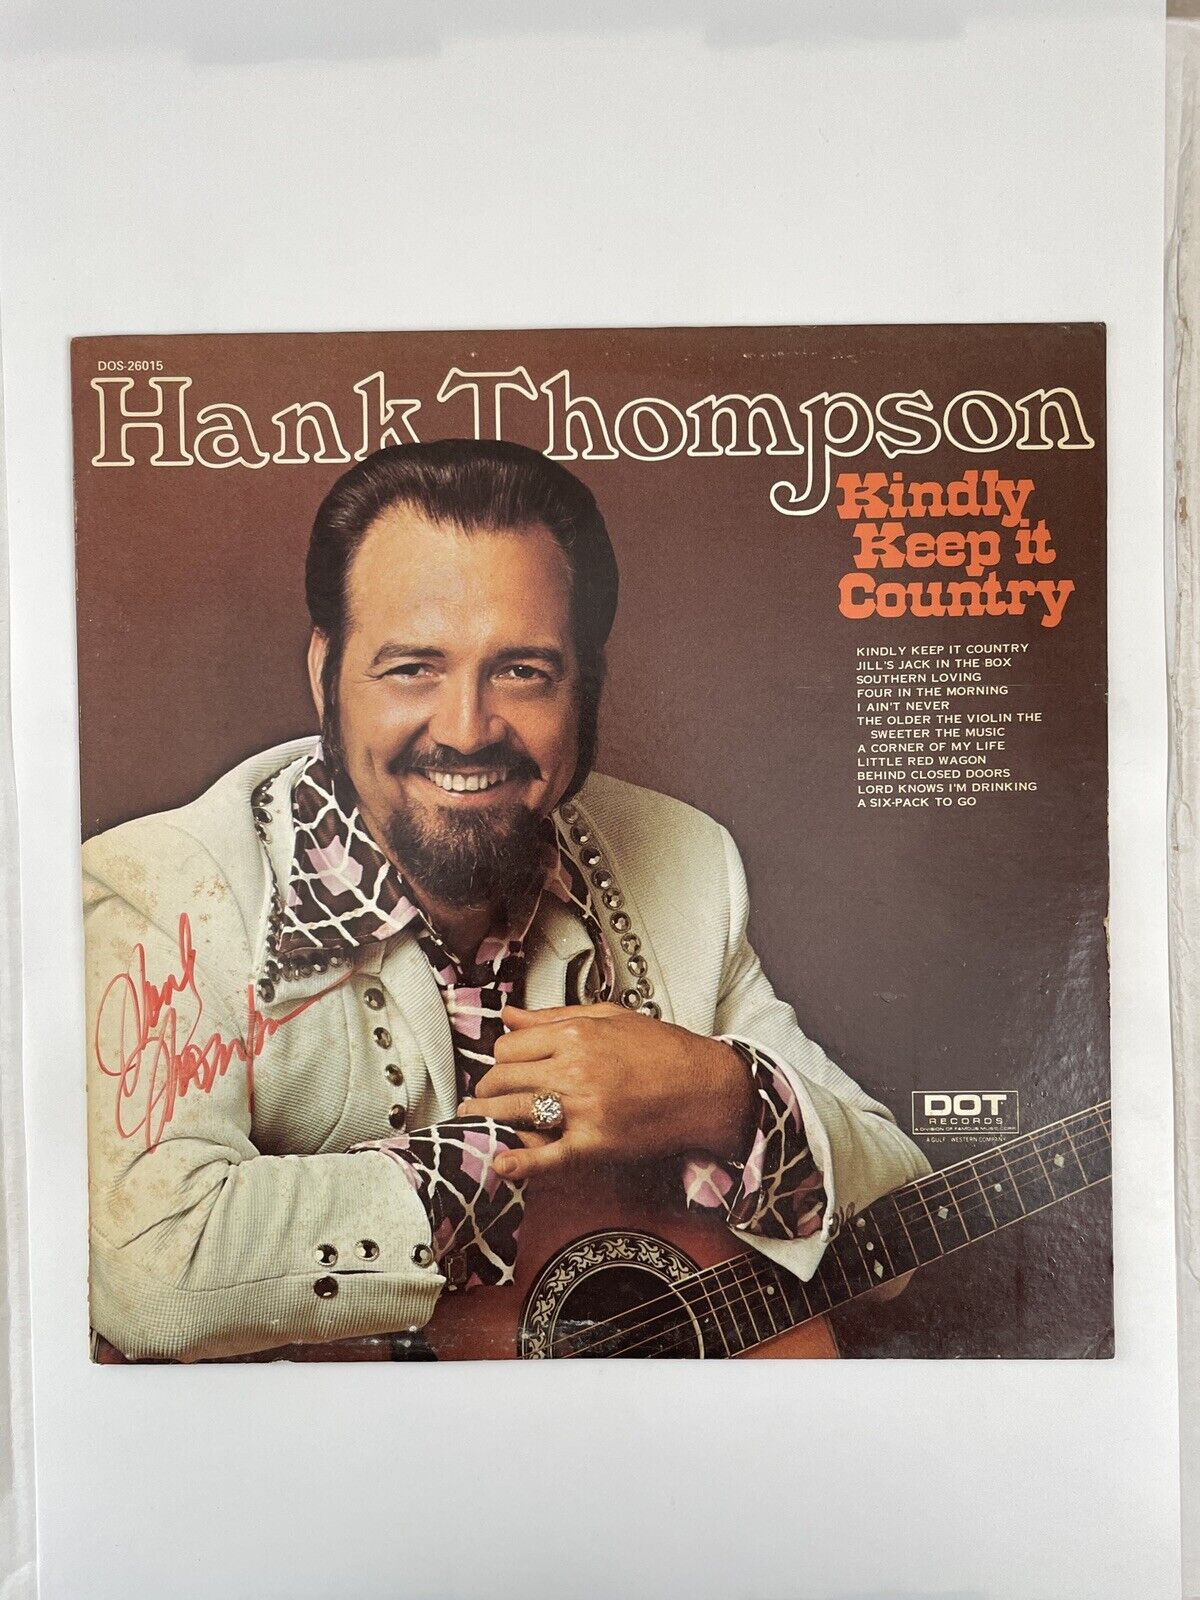 Hank Thompson Kindly Keep It Country Dot Records DOS-26015 Signed Autograph LP